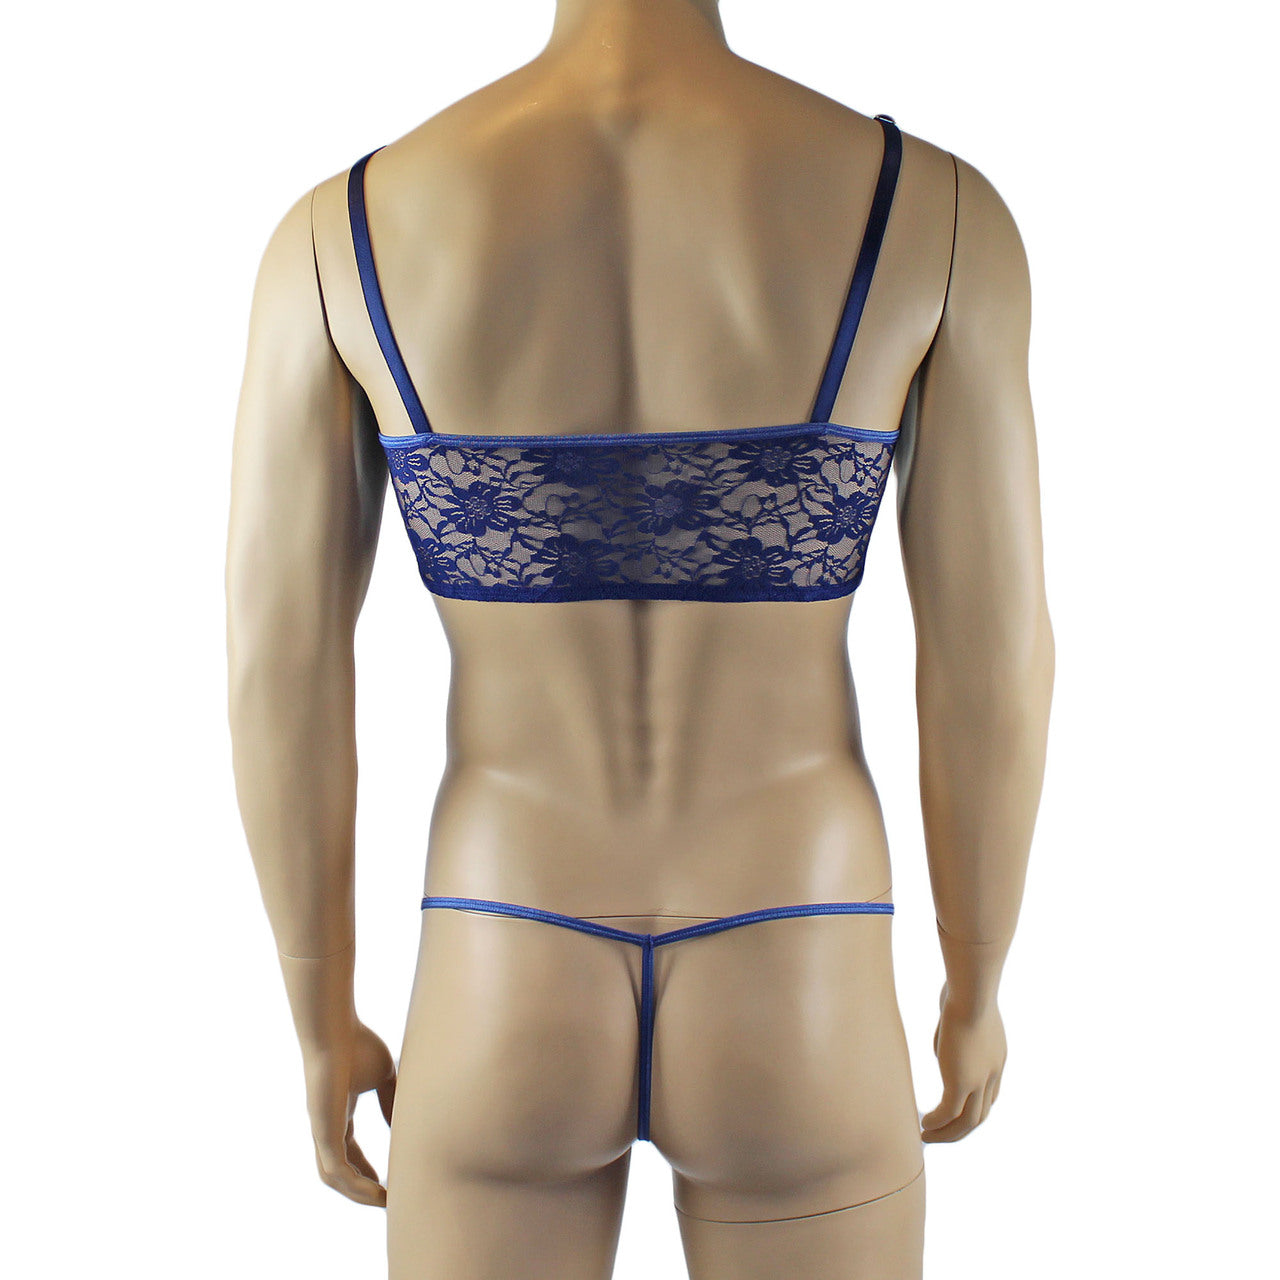 LAST ORDERS - Mens Sexy Lace Crop Bra Top Camisole and G string Male Lingerie Navy